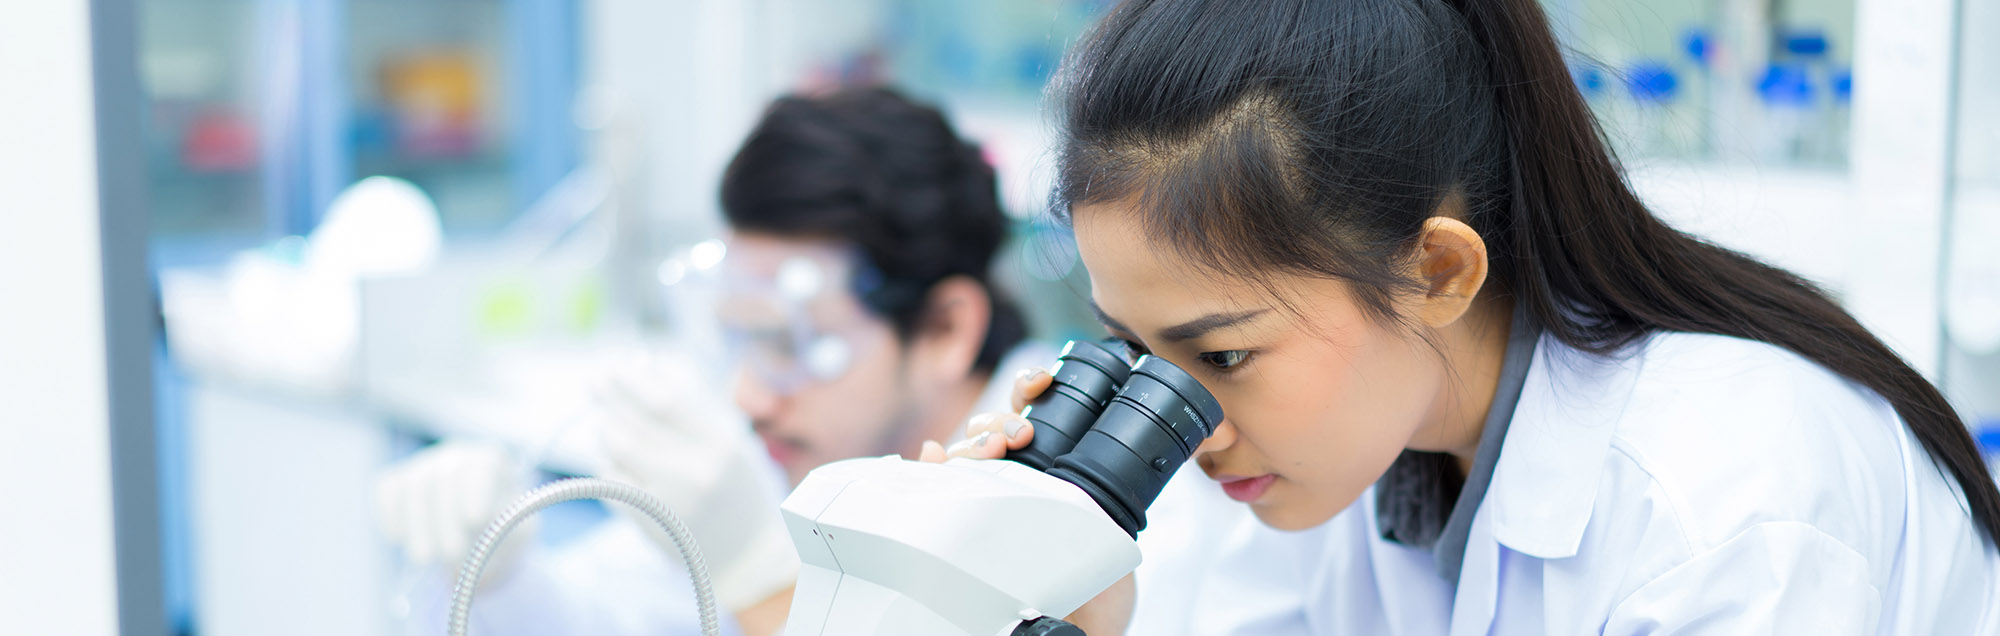 CE and Exam Preparation for Medical Laboratory Professionals